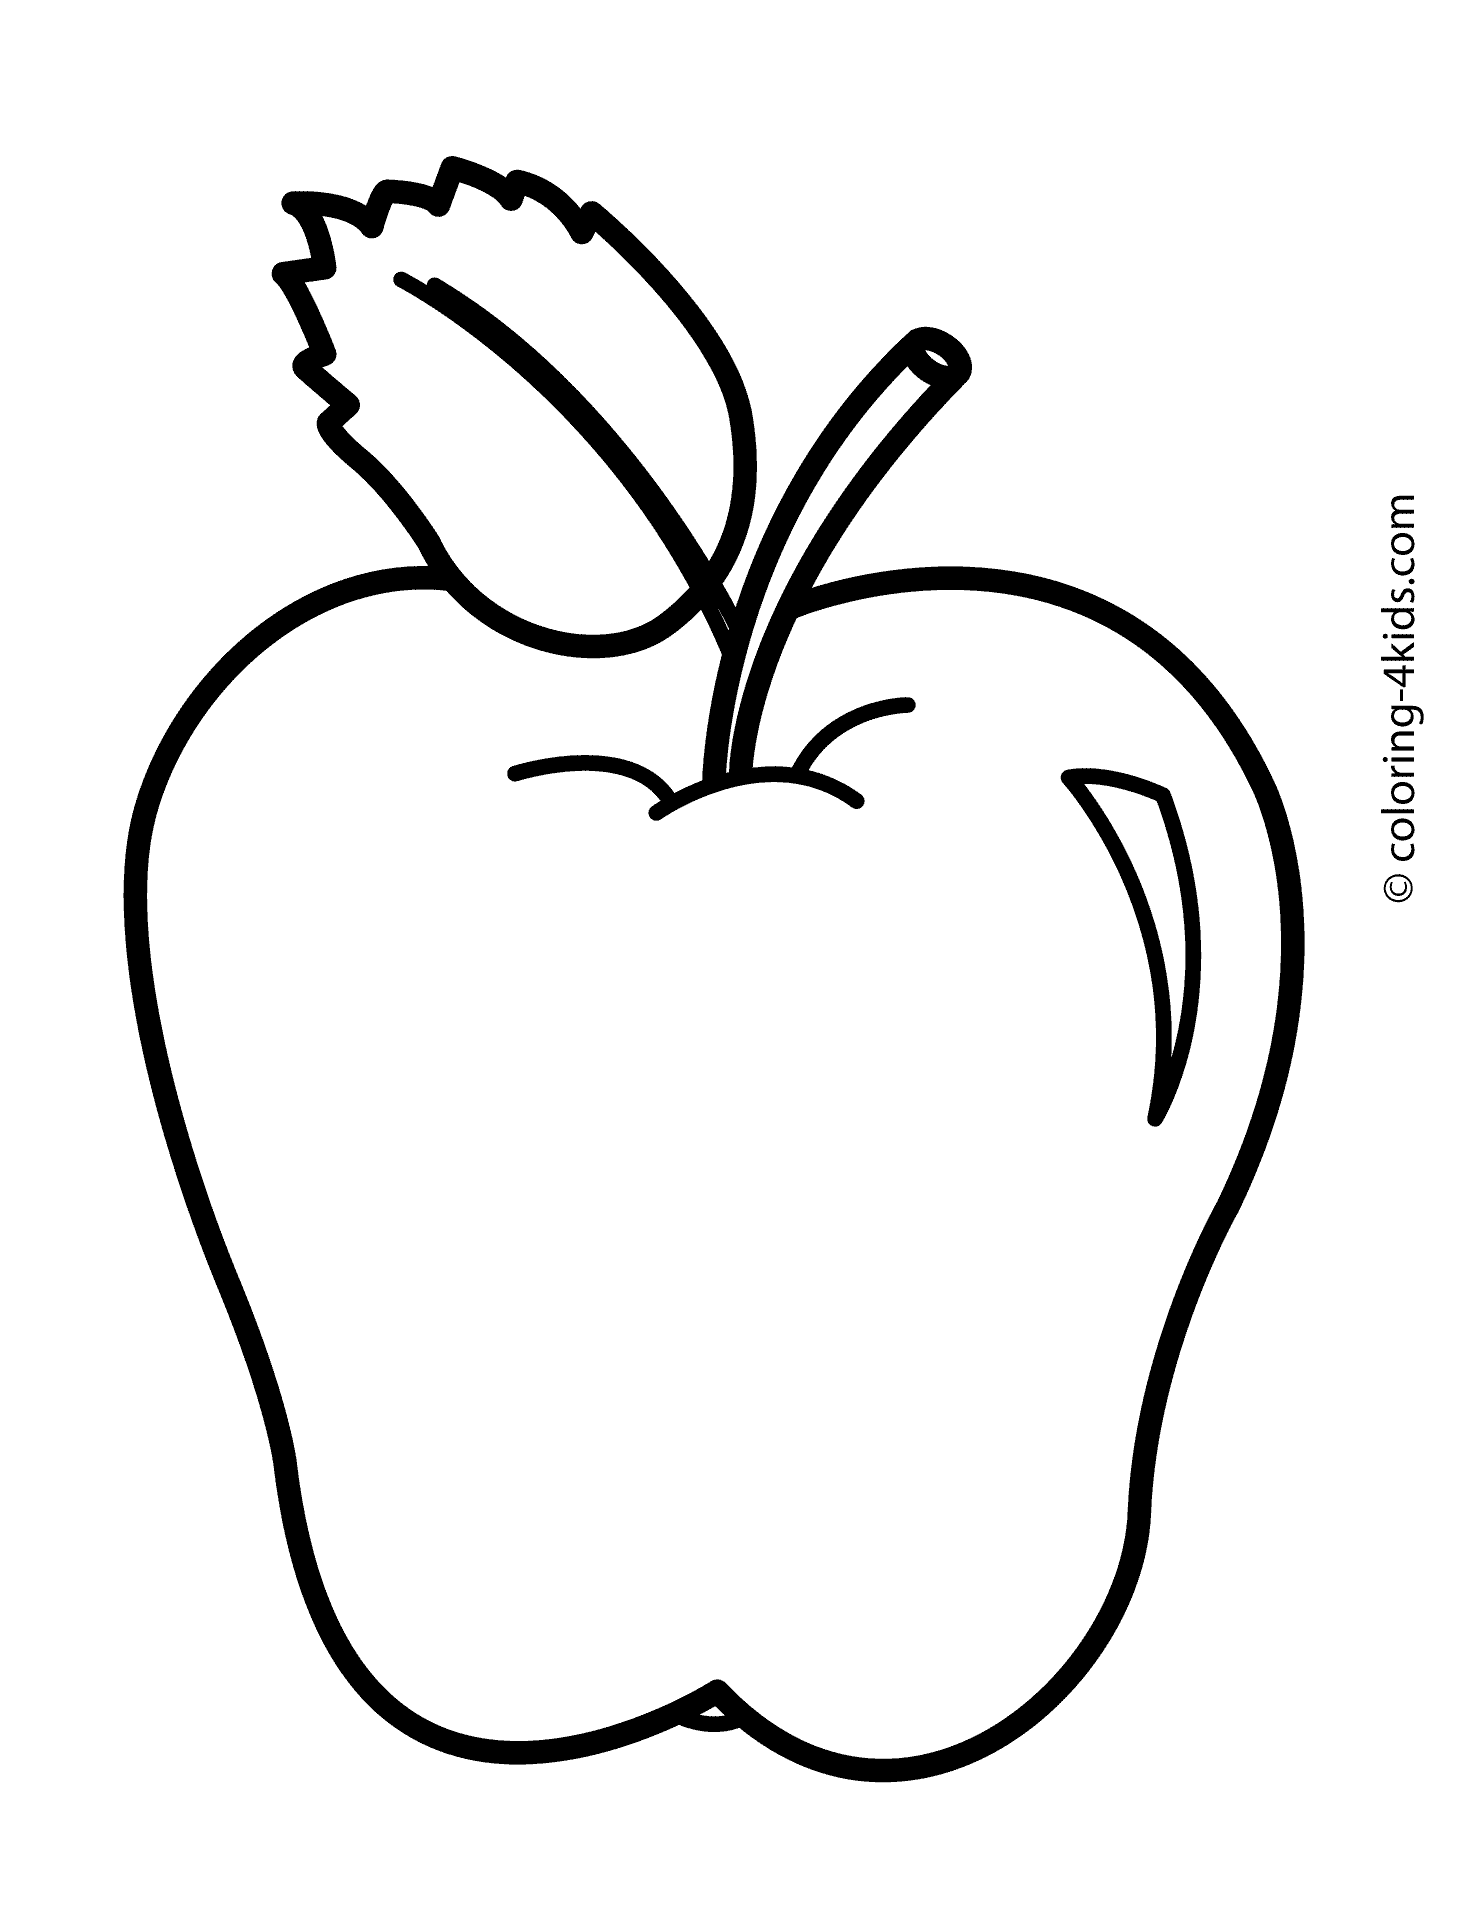 Apple Preschool Coloring Pages   Coloring Pages For All Ages ...